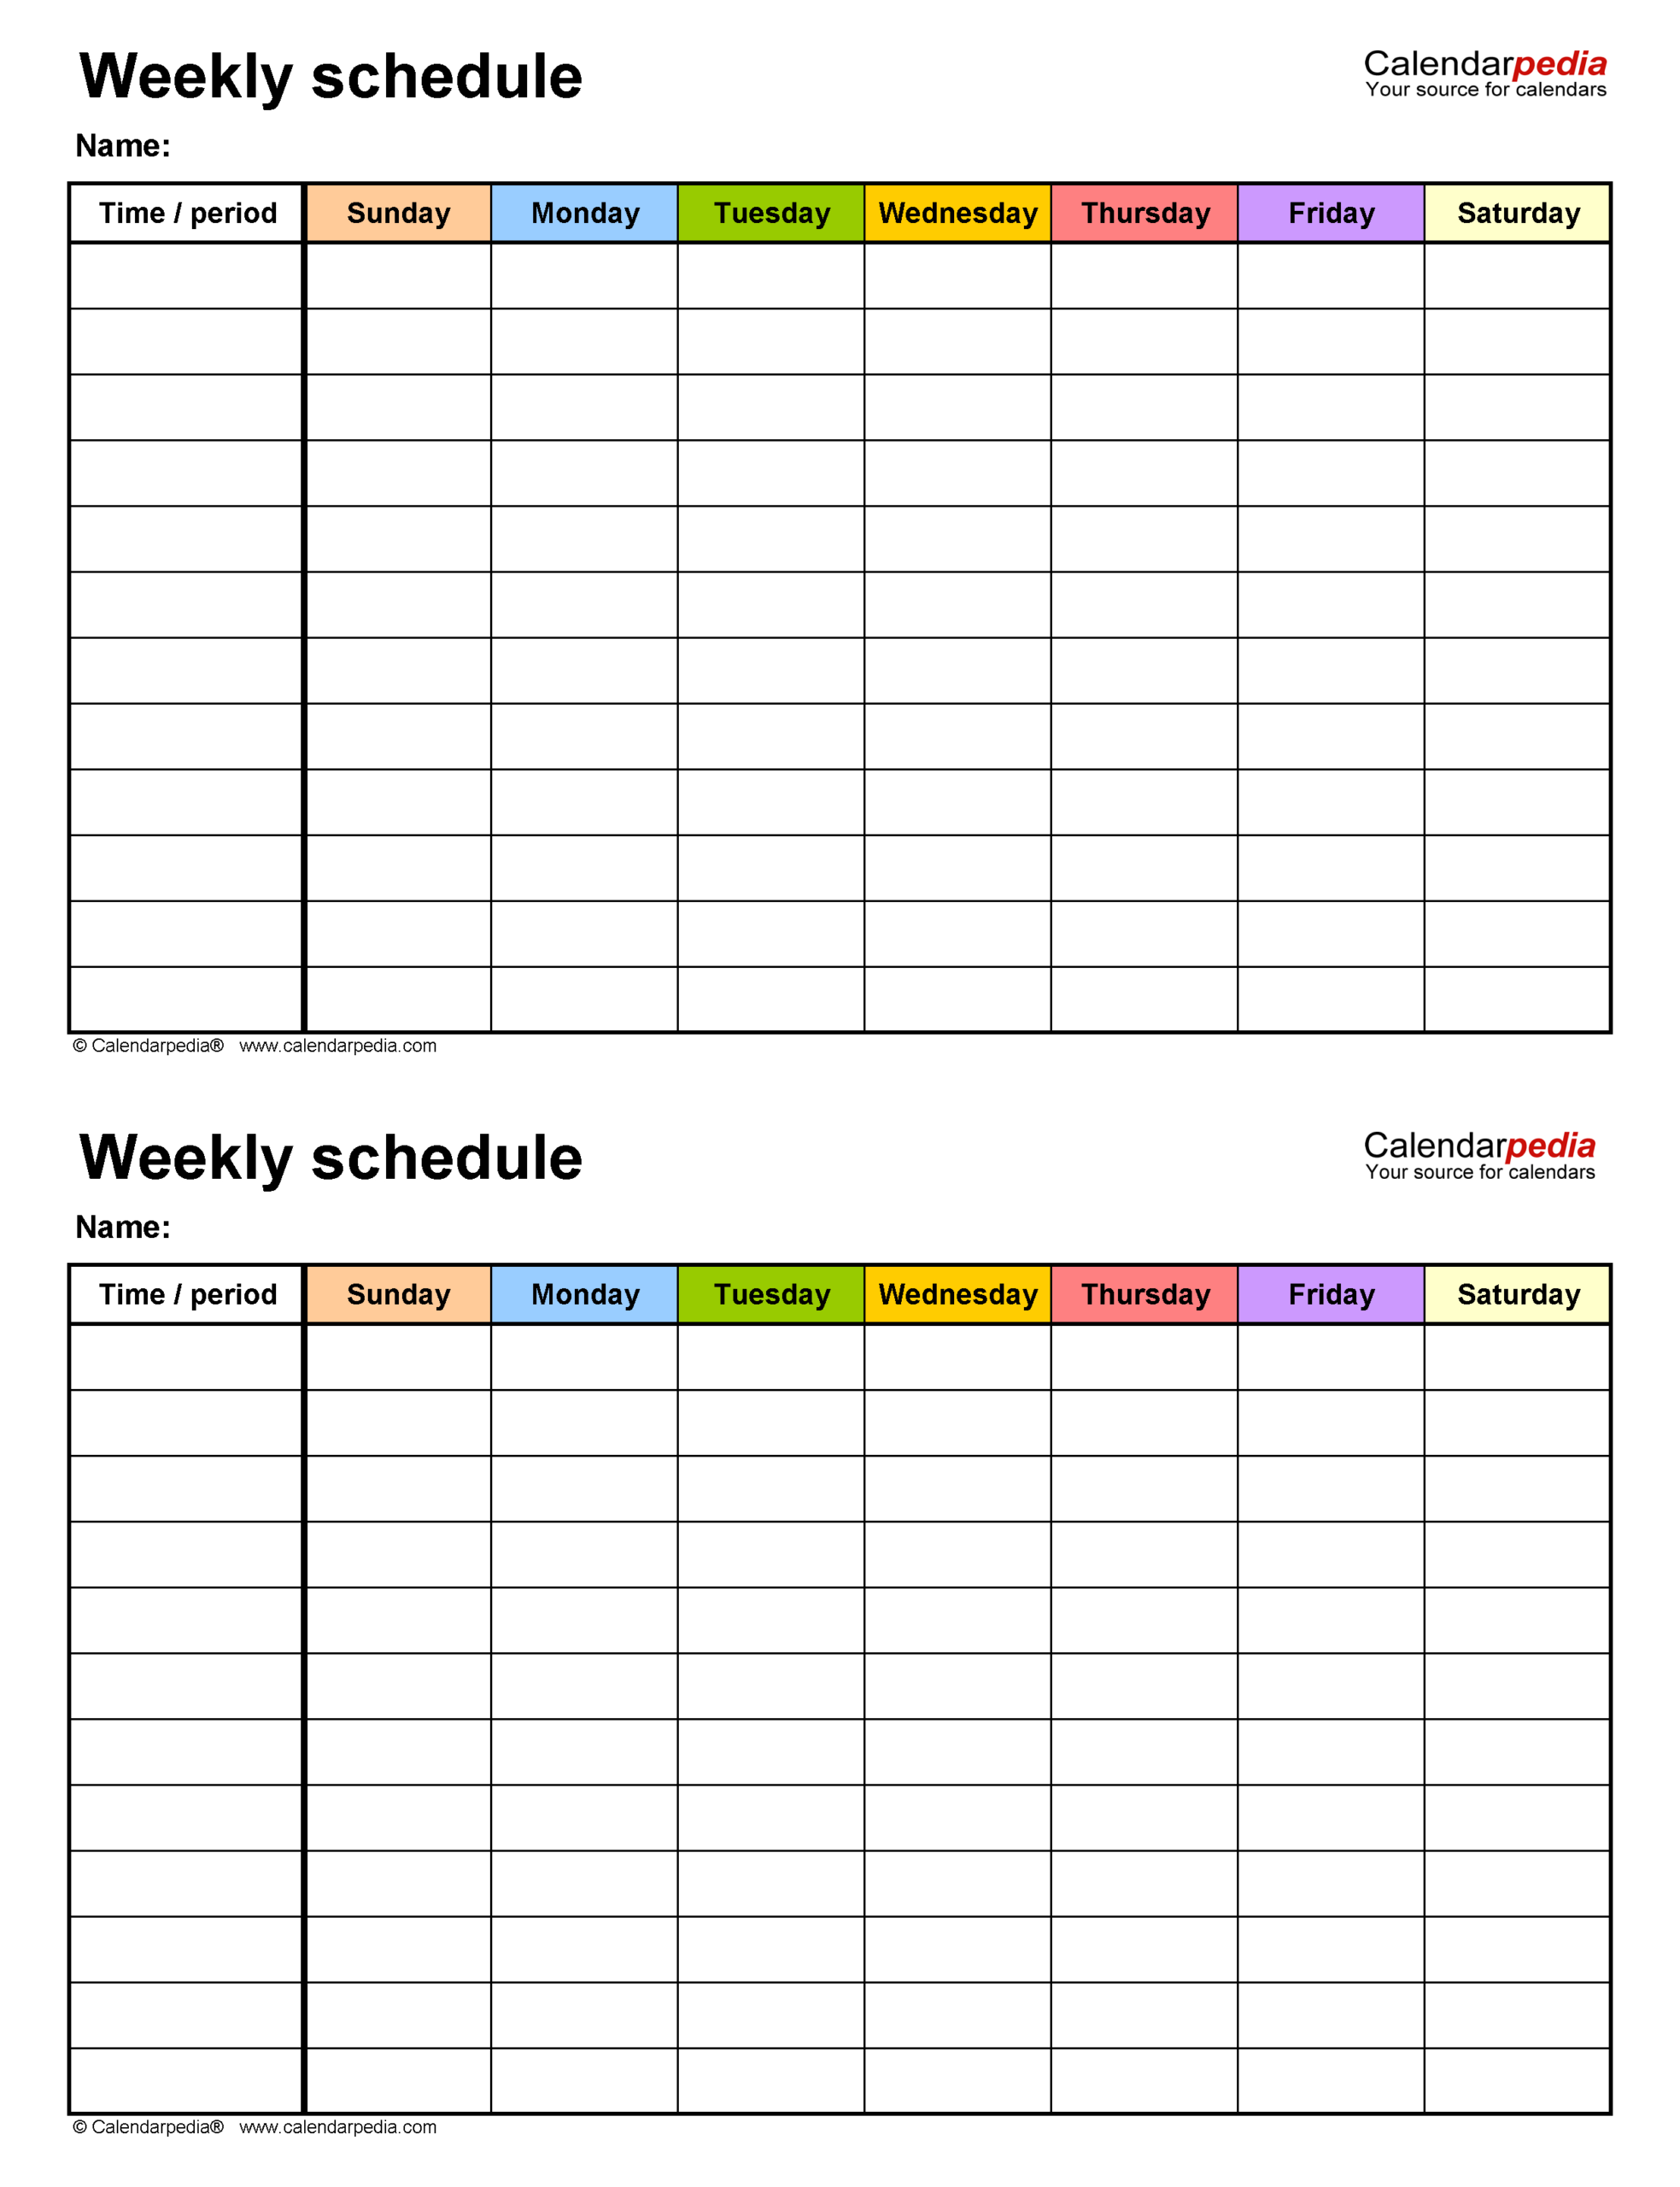 Free Weekly Schedule Templates For Word  18 Templates intended for 2 Week Blank Calendar